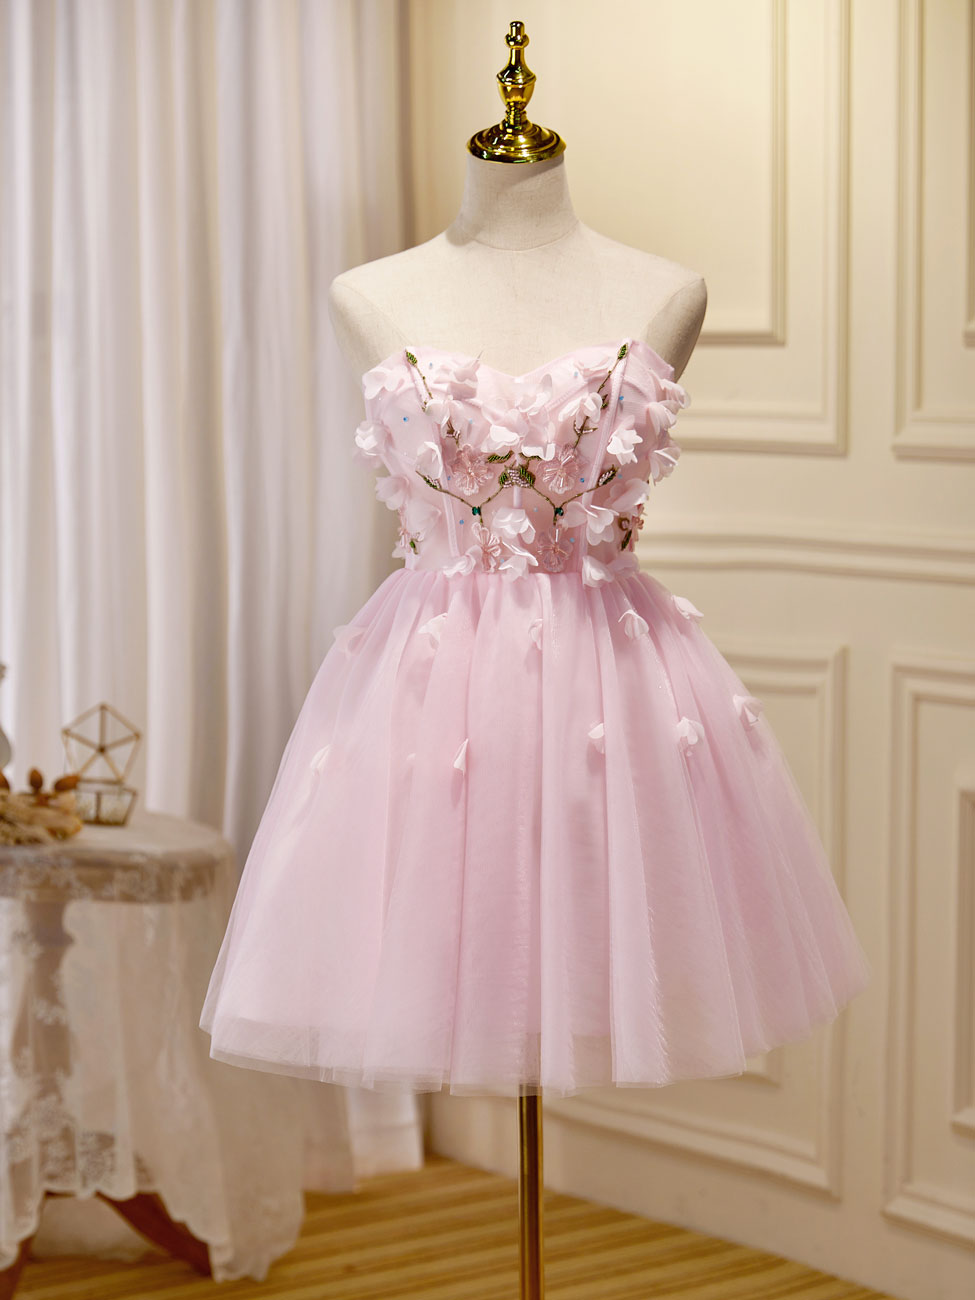 shopluu Mini/Short Pink Prom Dress, Cute Pink Homecoming Dresses with Beading Applique US 2 / Pink